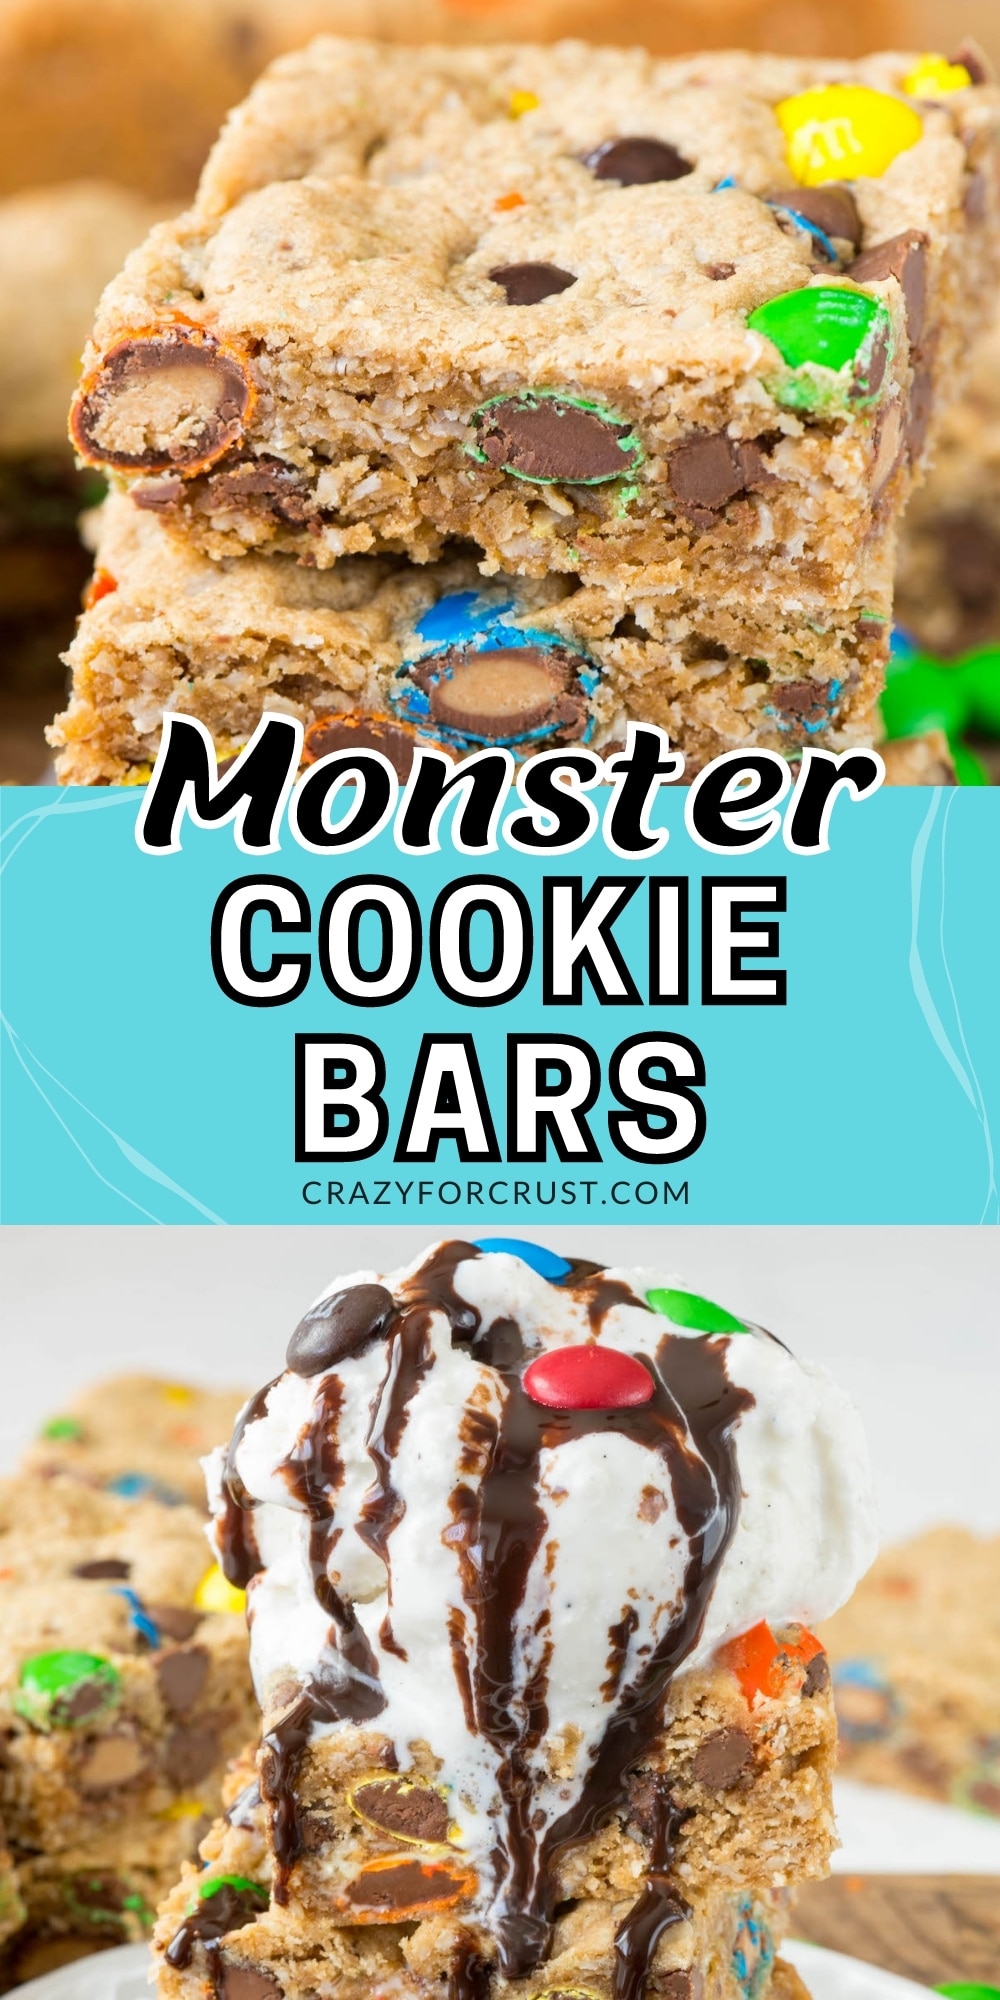 EPIC Monster Cookie Bars - Crazy for Crust